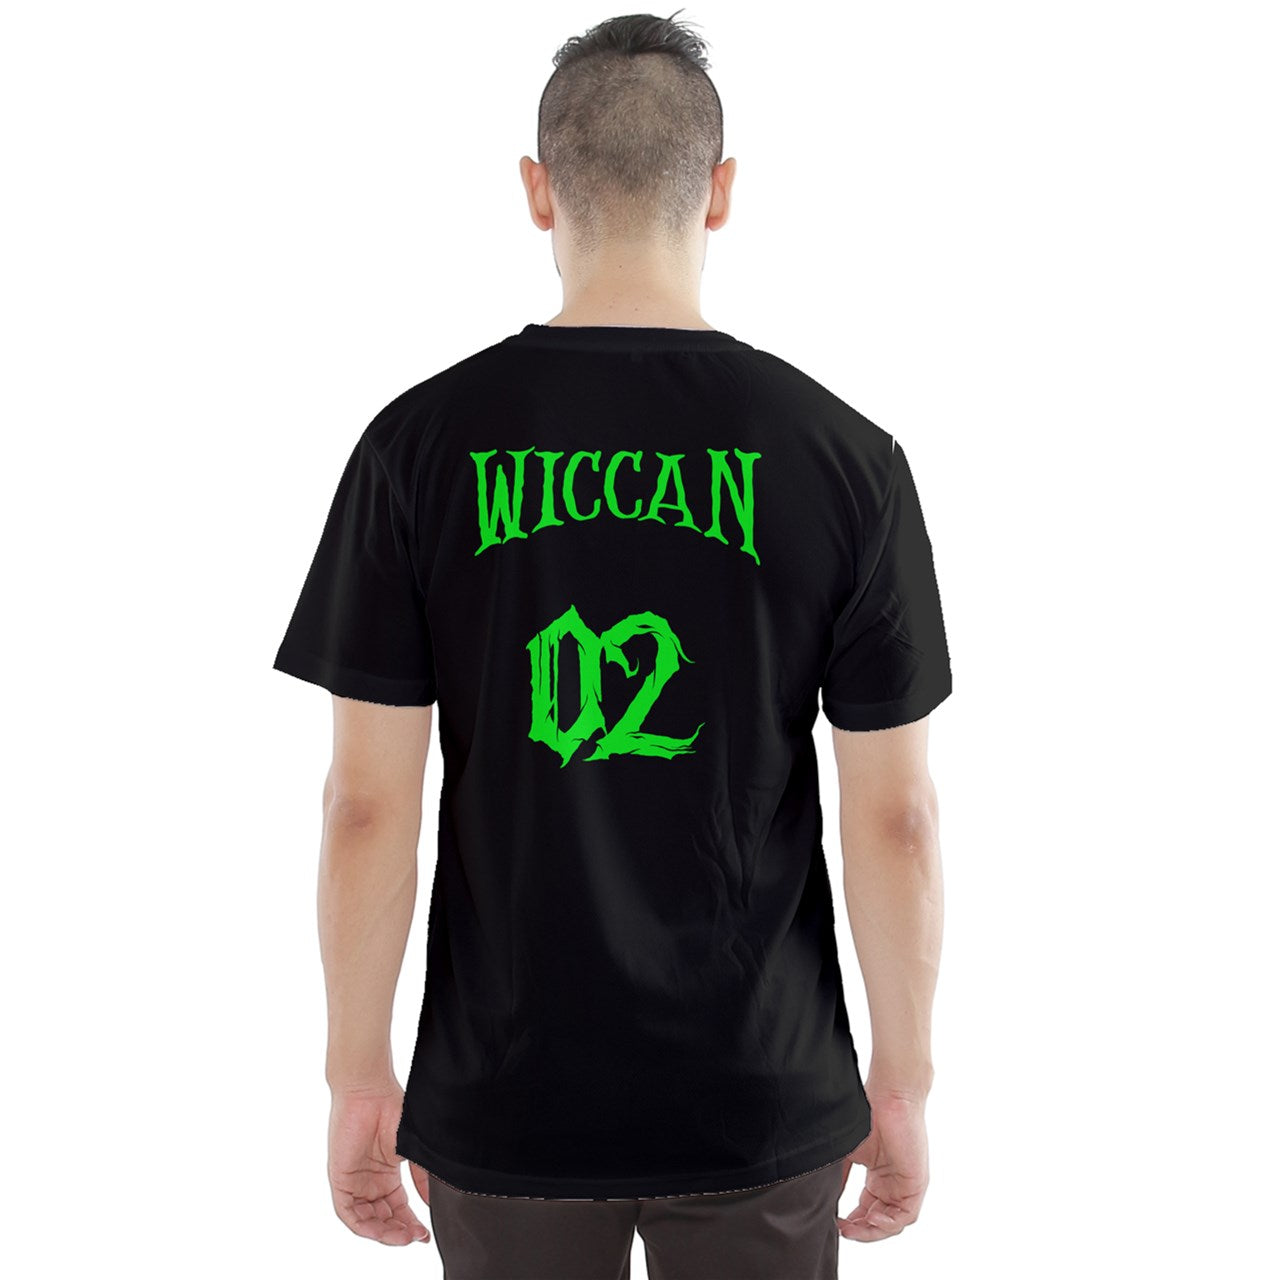 The Wiccan Harvest Tournament Tee